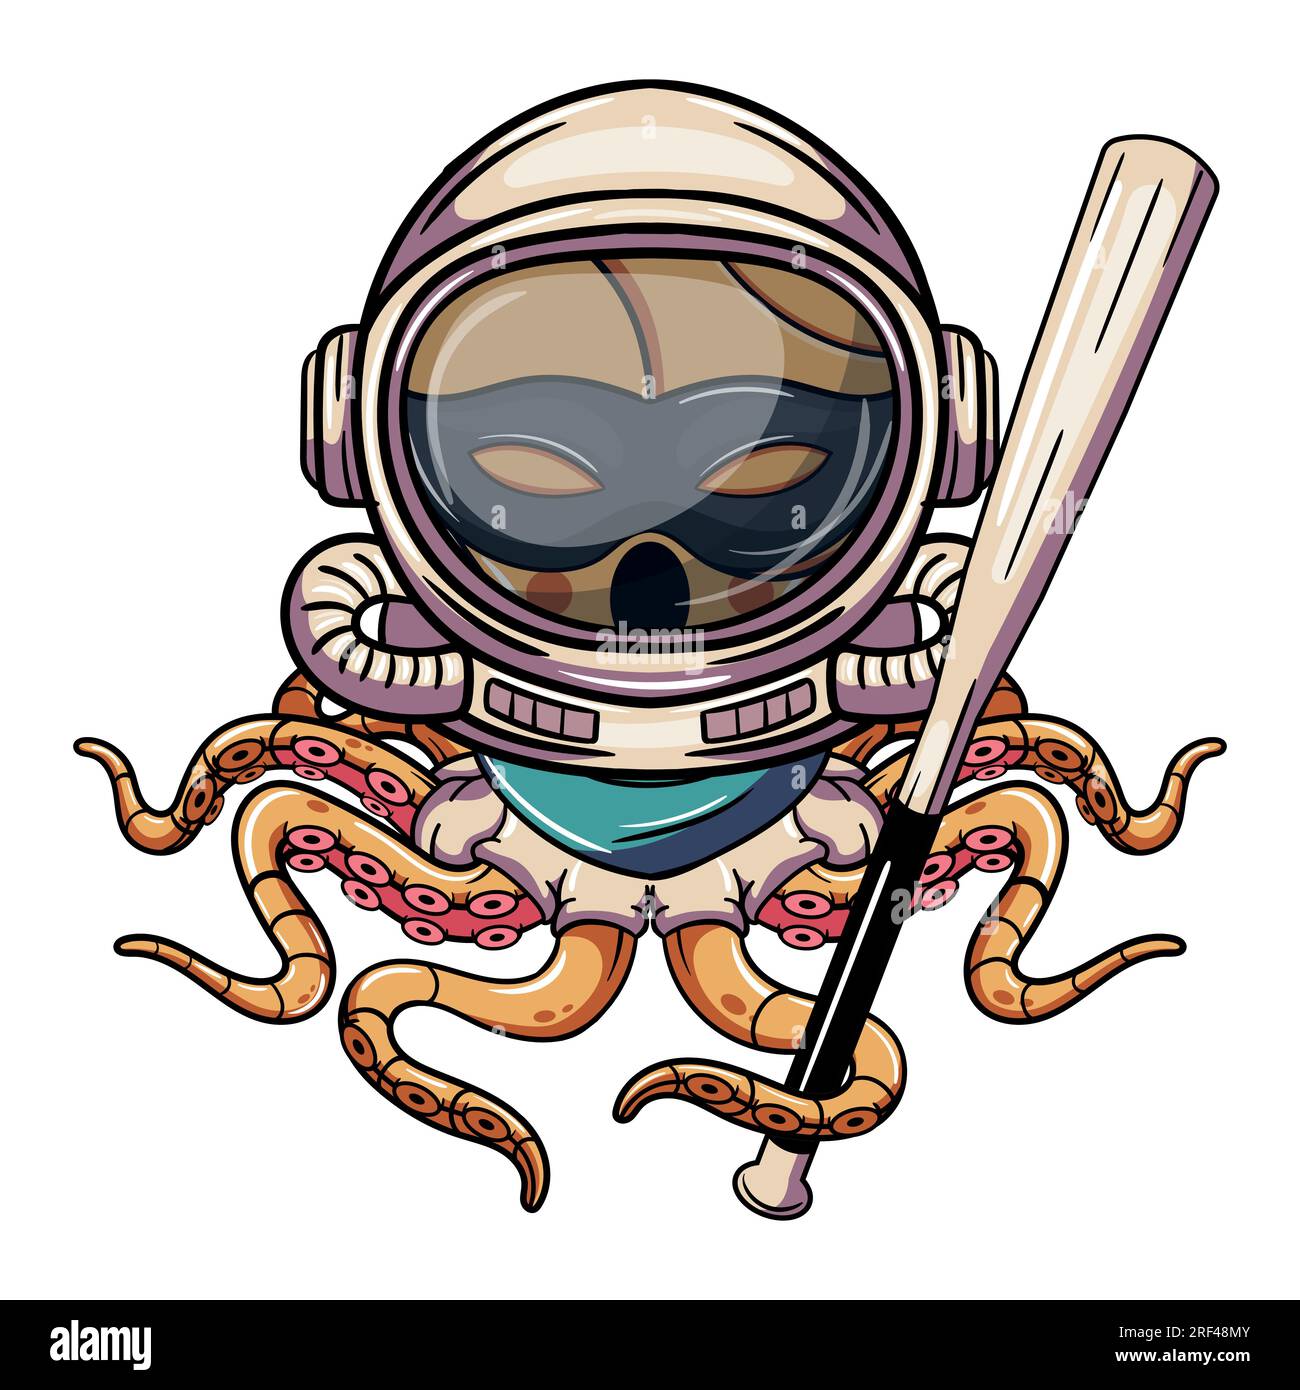 Cartoon octopus cyborg astronaut character with space suit and a baseball bat. Illustration for fantasy, science fiction and adventure comics Stock Vector